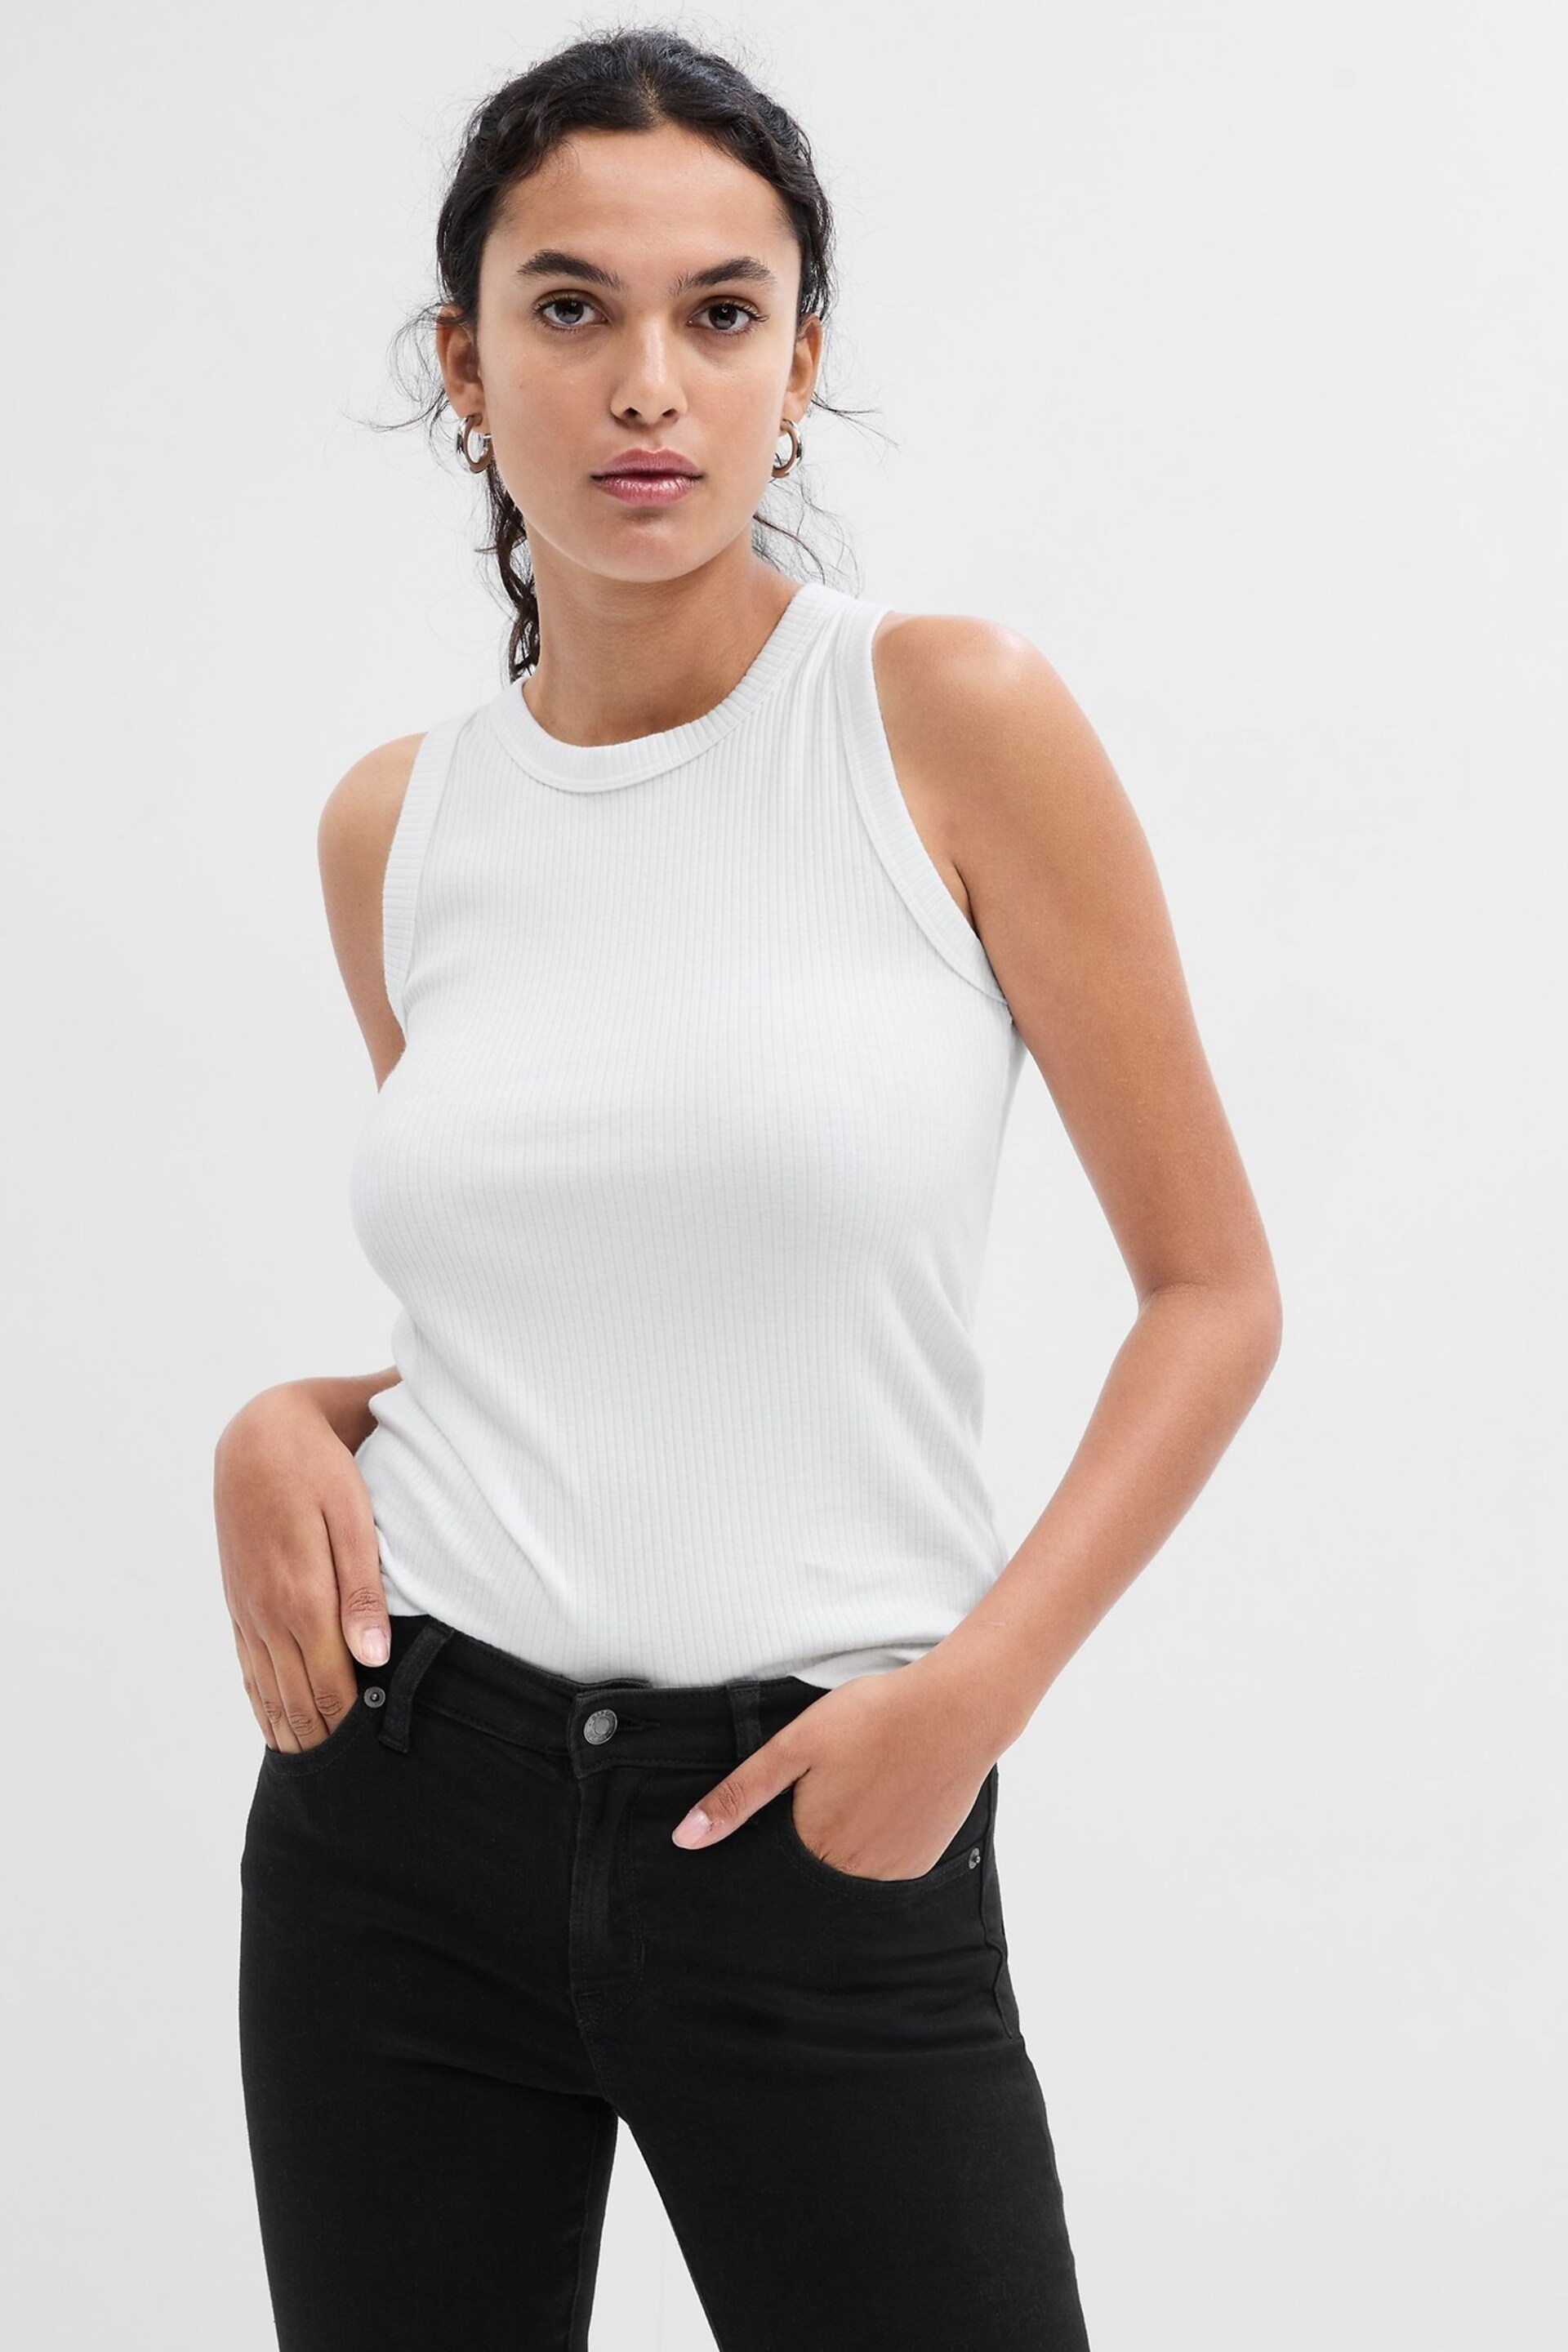 Gap White Ribbed Racer High Neck Vest Top - Image 1 of 1